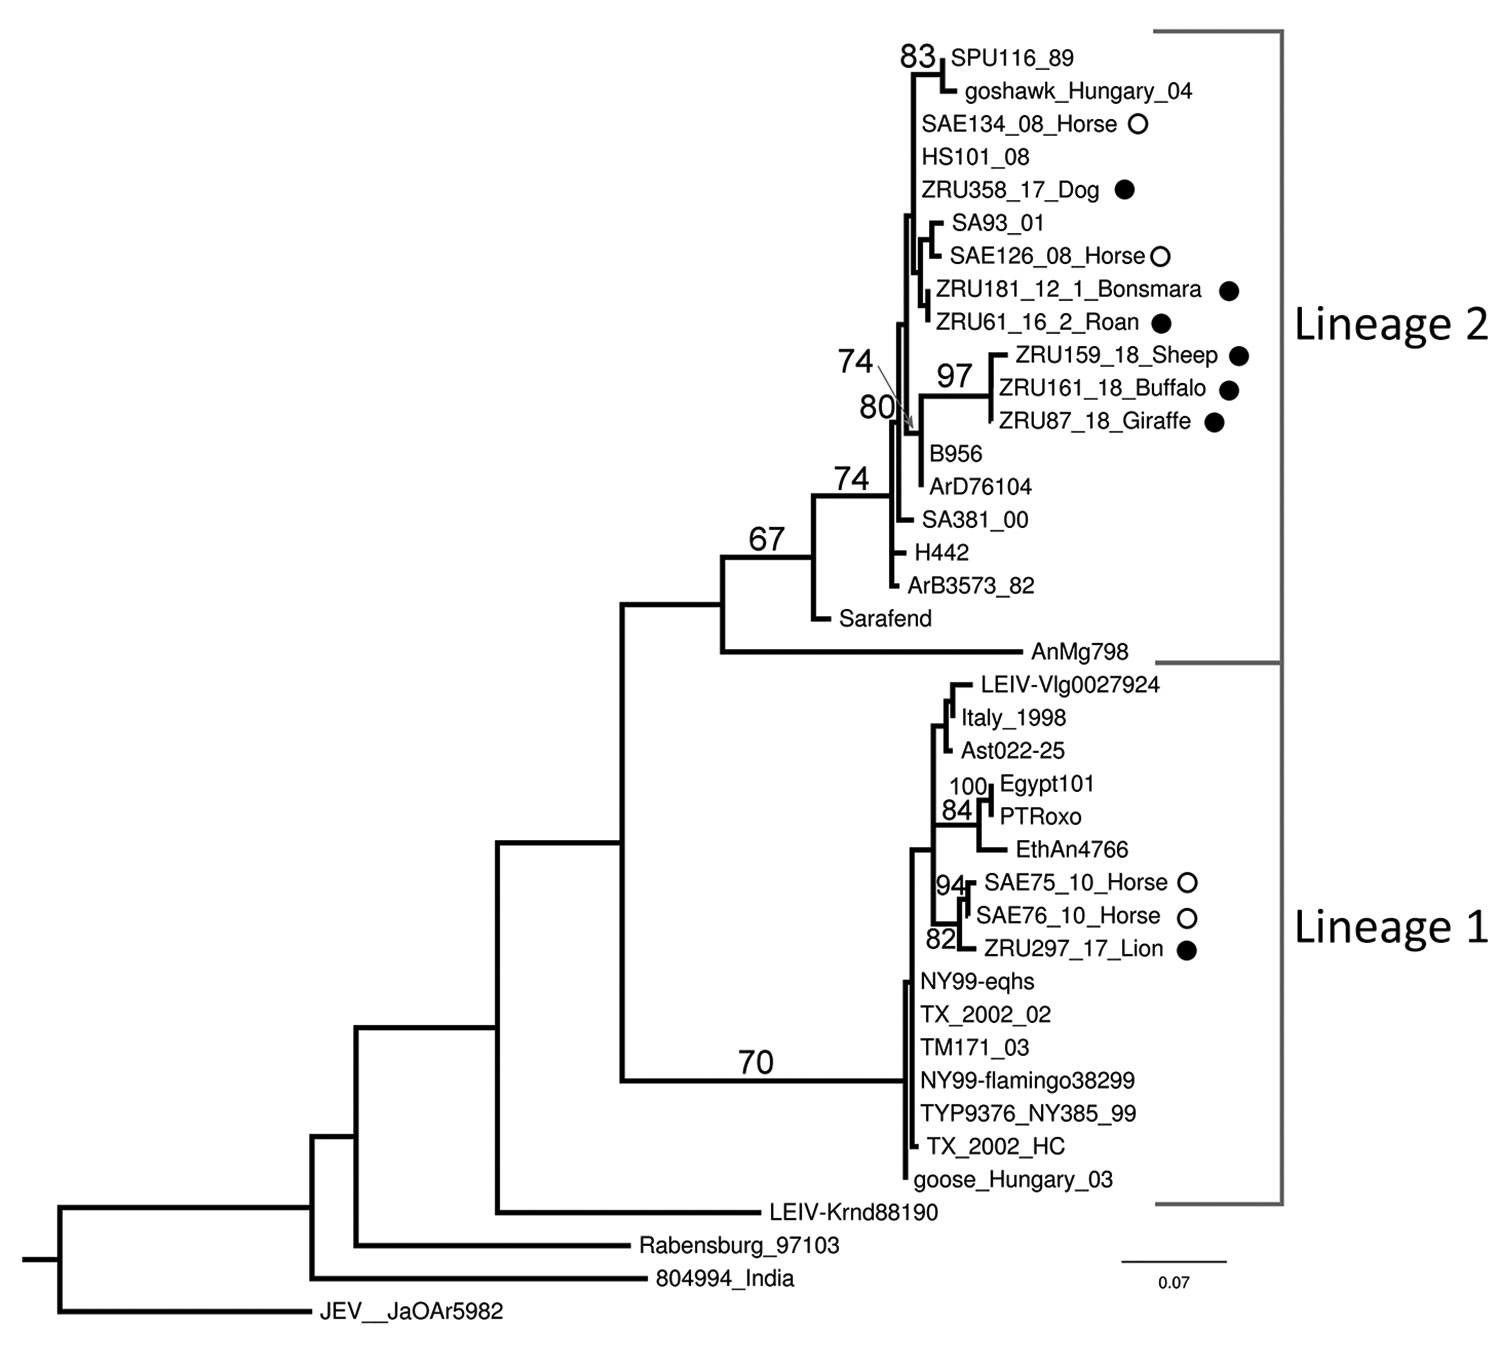 Maximum-likelihood phylogram of the partial (215-nt) nonstructural protein gene used for identification of West Nile virus infection in wildlife and nonequine domestic animals, South Africa, 2010–2018. Tree was generated with RAXML (https://cme.h-its.org/exelixis/web/software/raxml) using the general time-reversible plus gamma model with 39 taxa and the AutoMRE bootstopping function invoked (bootstraps &gt;65 as branch support). Black circles indicate wildlife and nonequine domestic animal seque